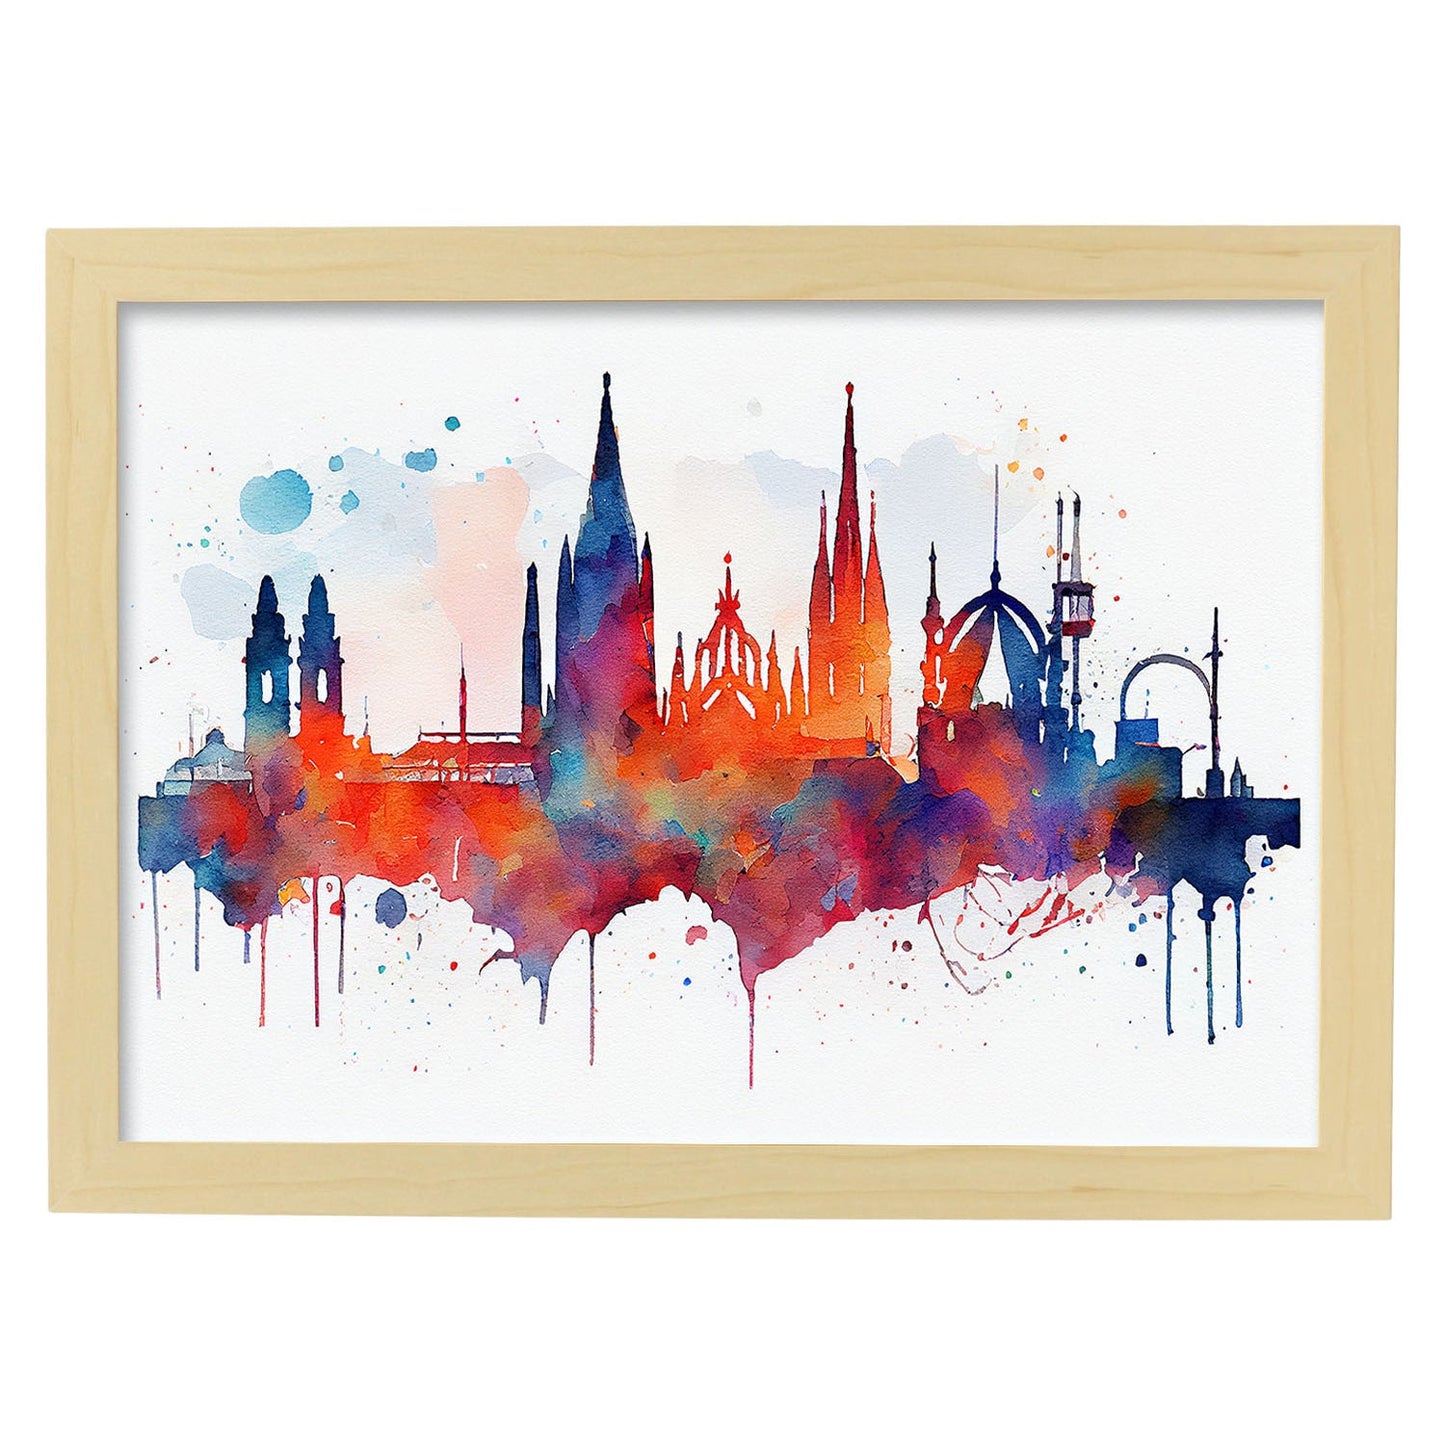 Nacnic watercolor of a skyline of the city of Barcelona_2. Aesthetic Wall Art Prints for Bedroom or Living Room Design.-Artwork-Nacnic-A4-Marco Madera Clara-Nacnic Estudio SL